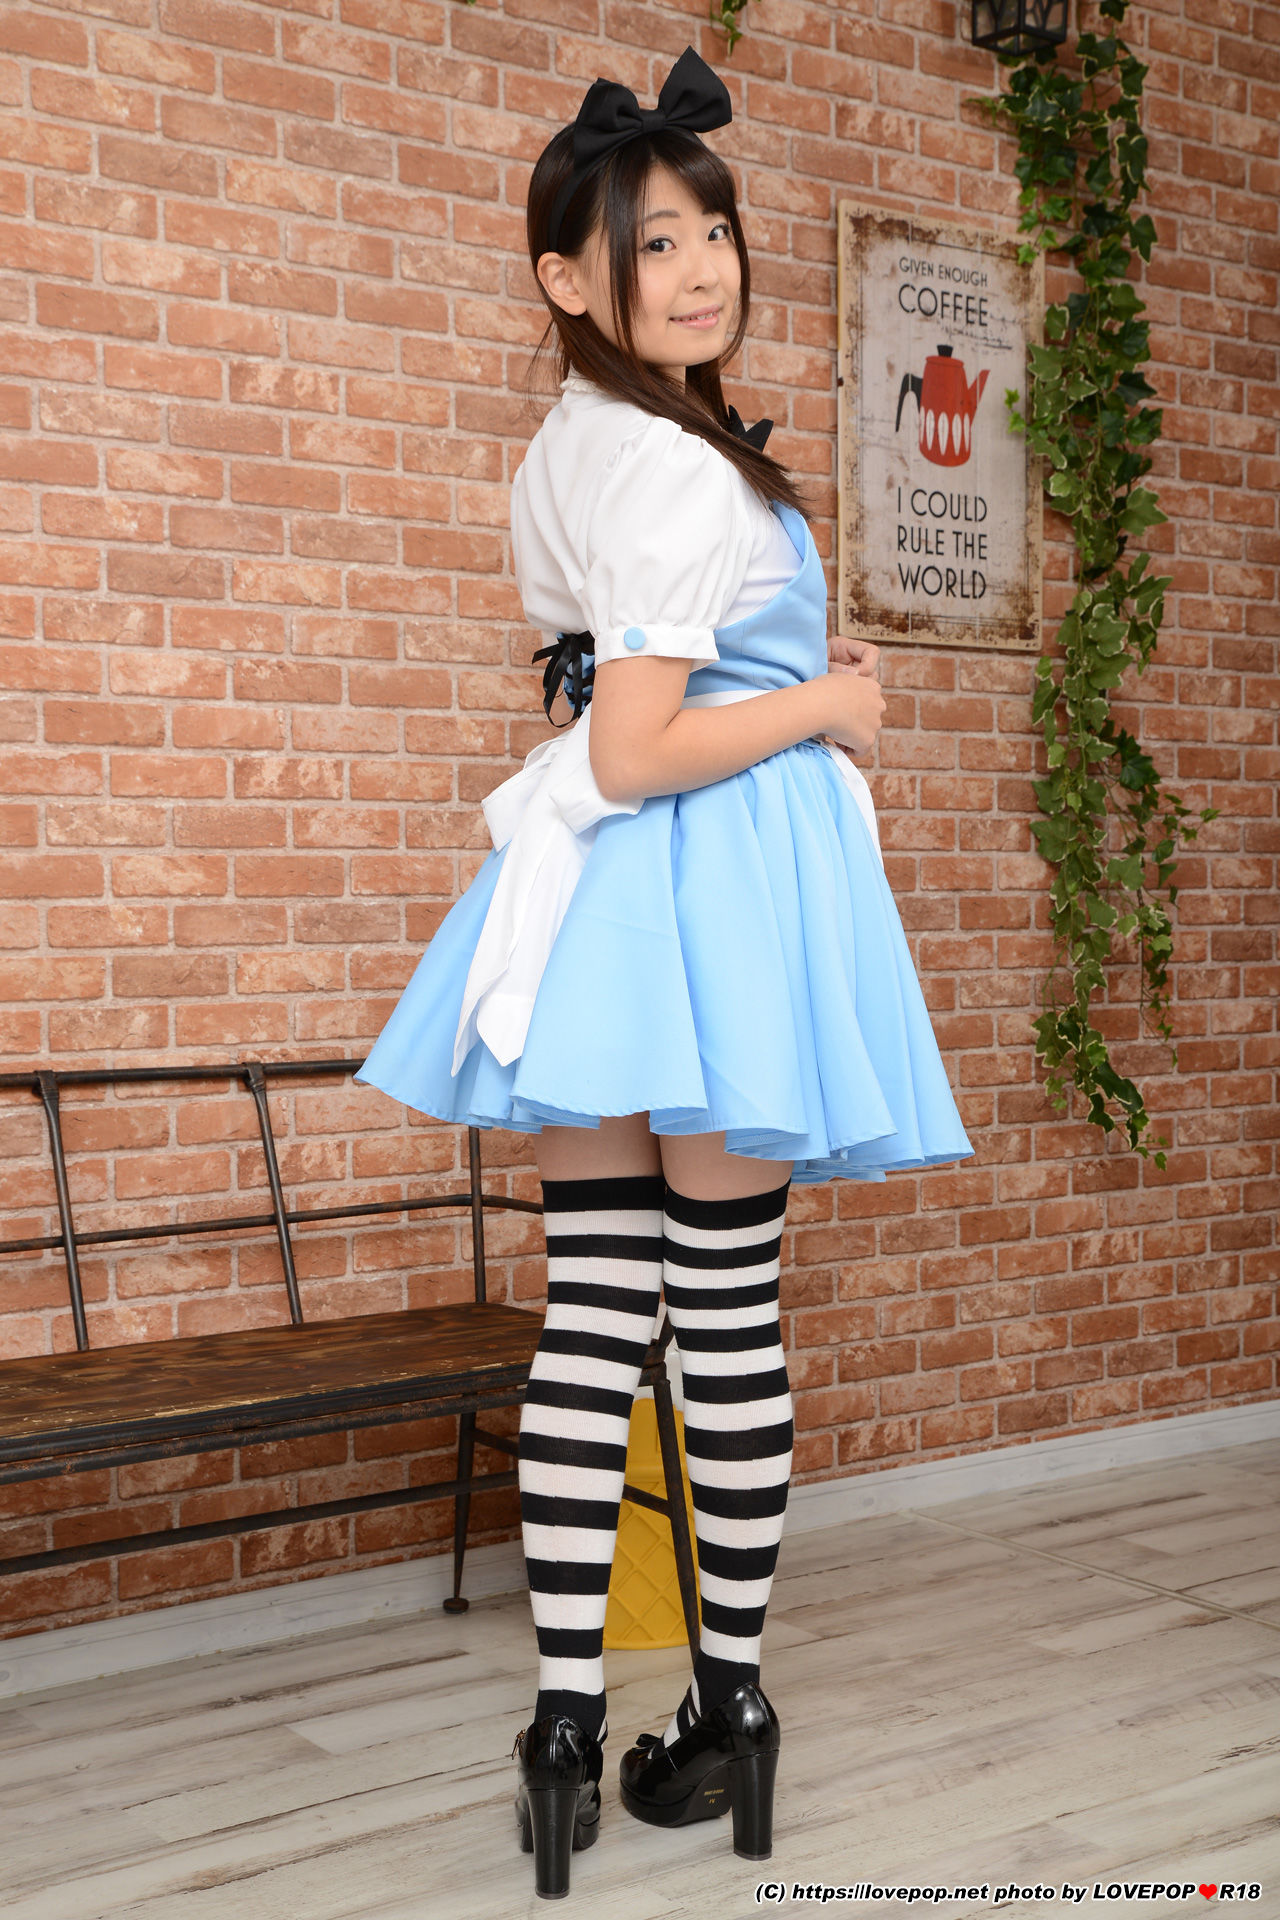 [LOVEPOP] Special Maid Collection - Airi Satou さとう愛理 Photoset 03